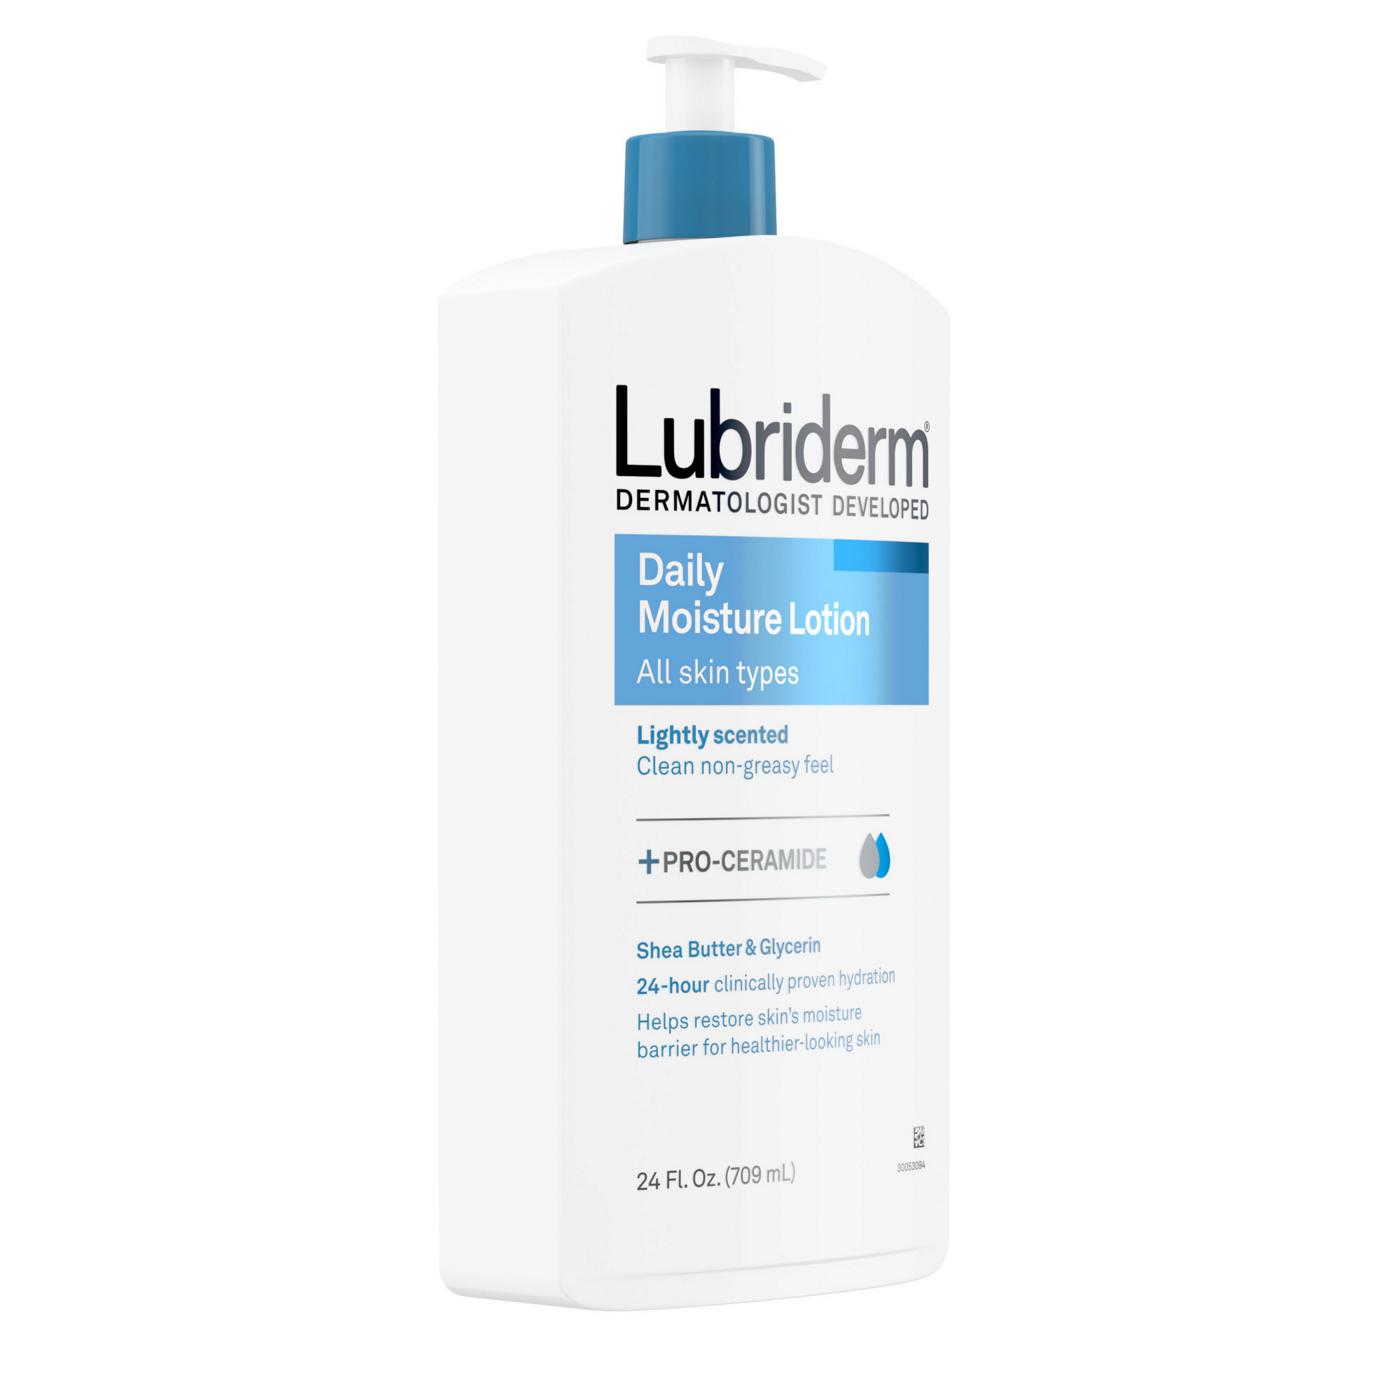 Lubriderm Daily Moisture Lotion; image 8 of 8